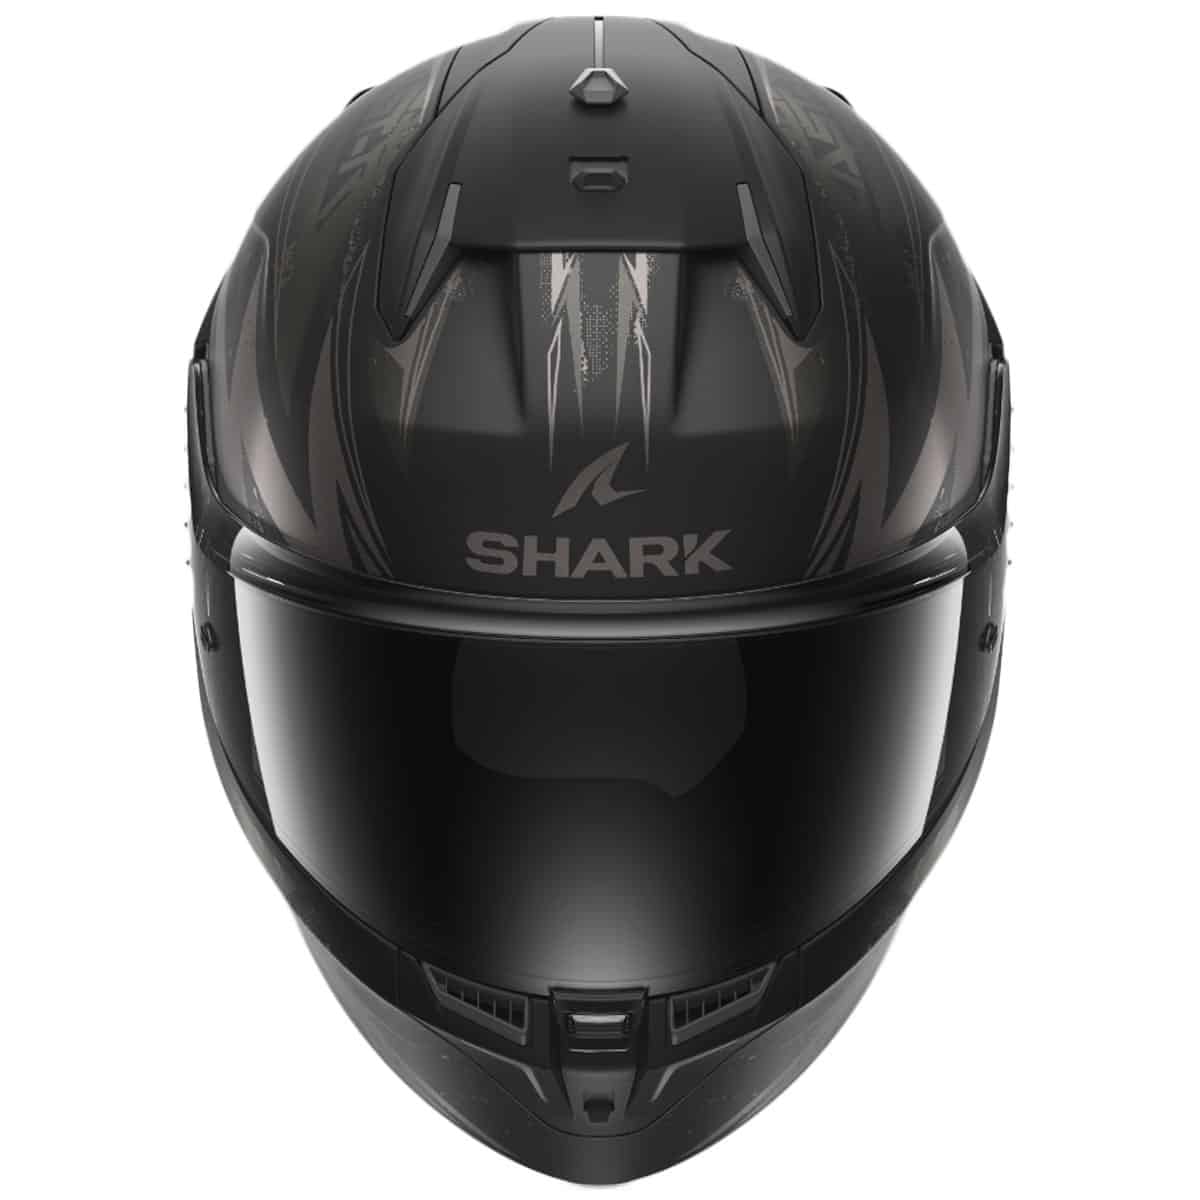 In this price class the Shark D-Skwal 3 offers one of the best interior fits for most head shapes, and the helmet has all the details that make a difference day-to-day - front view